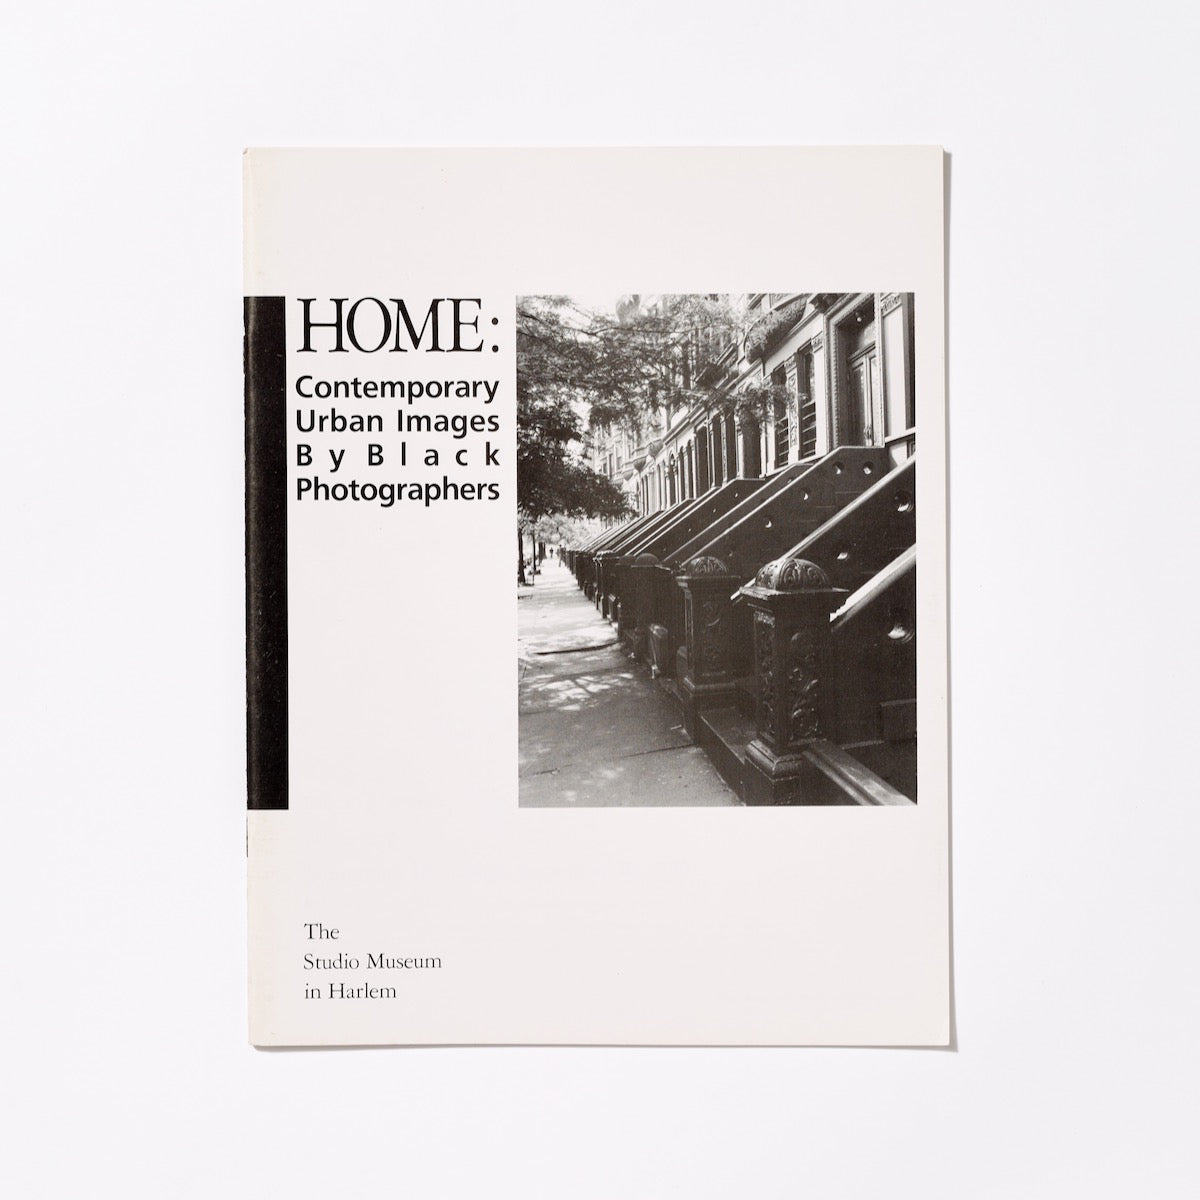 Home: Contemporary Urban Images by Black Photographers